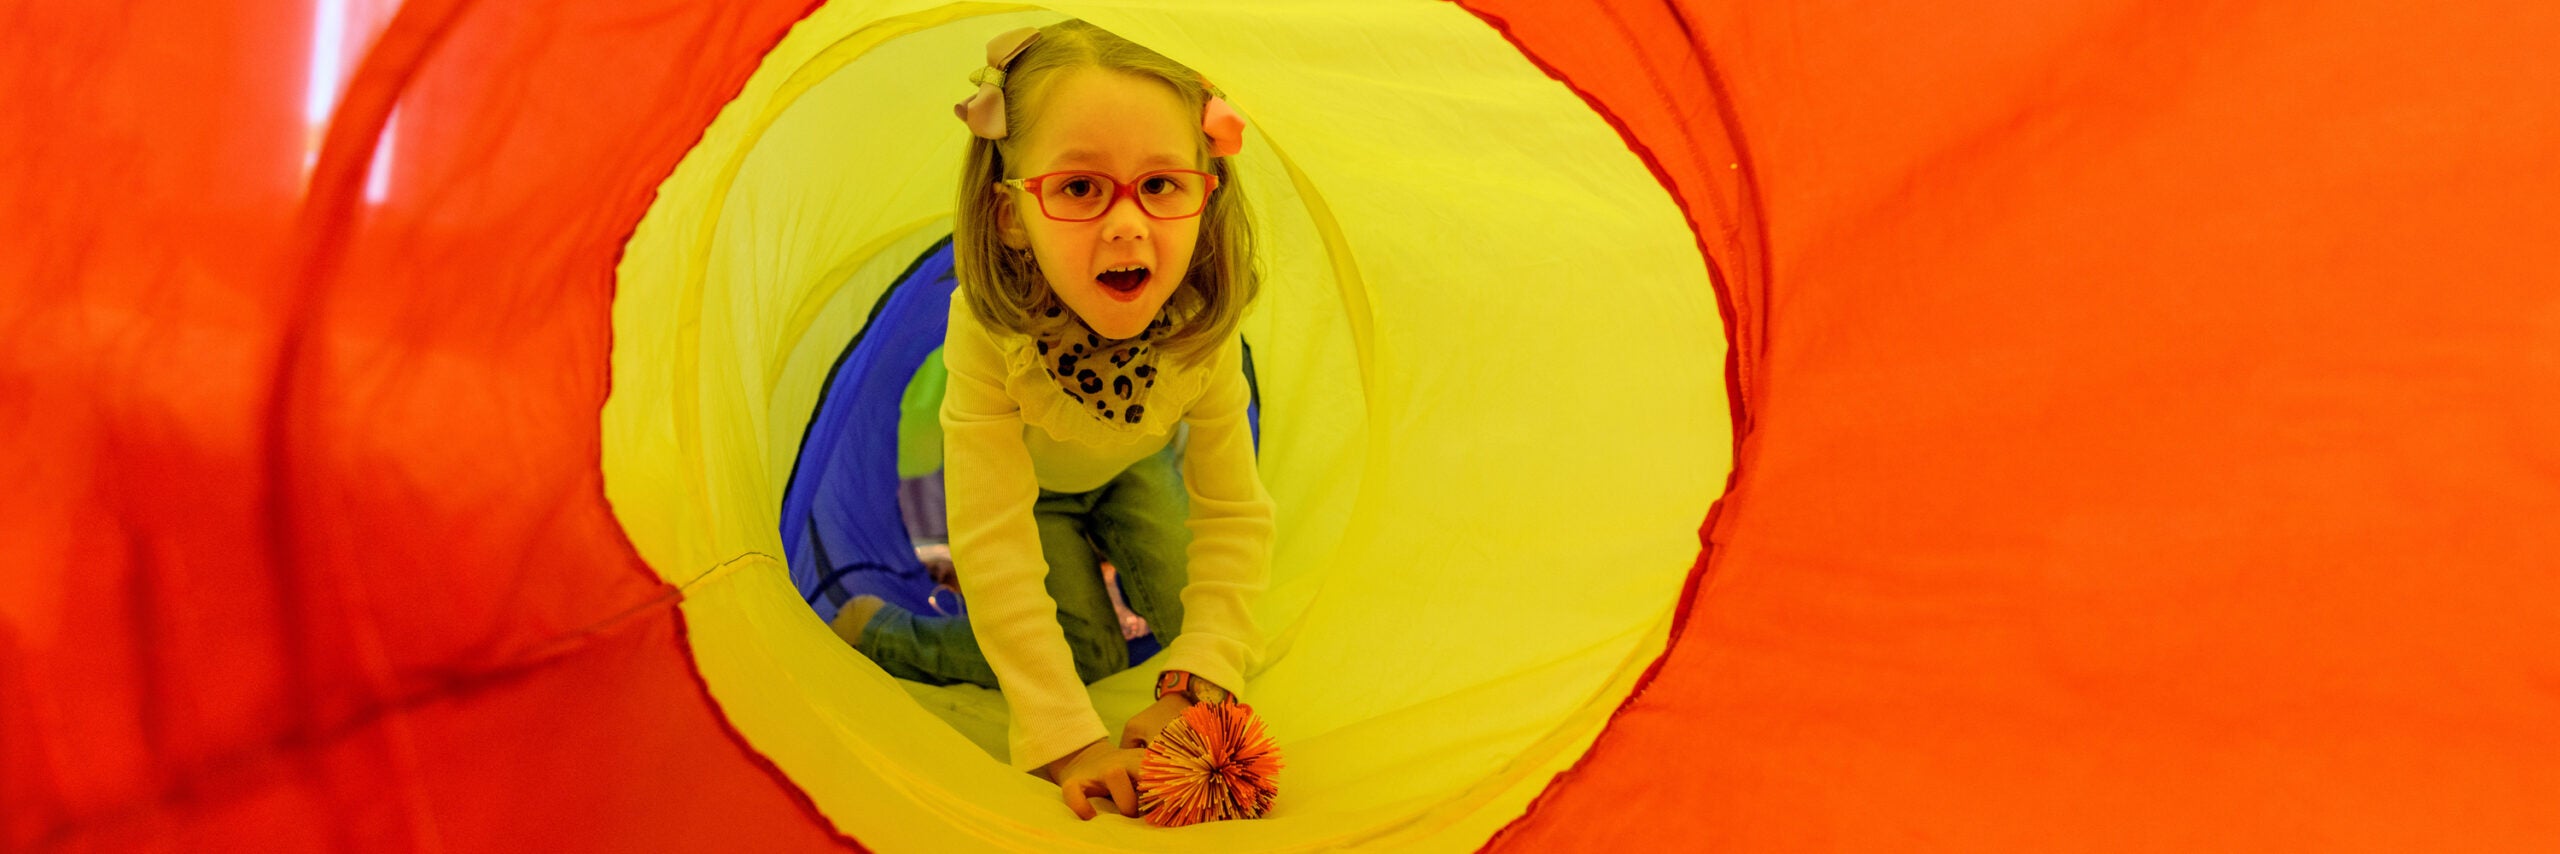 A girl living with cerebral palsy playing in a sensory room, snoezelen, during a therapy session